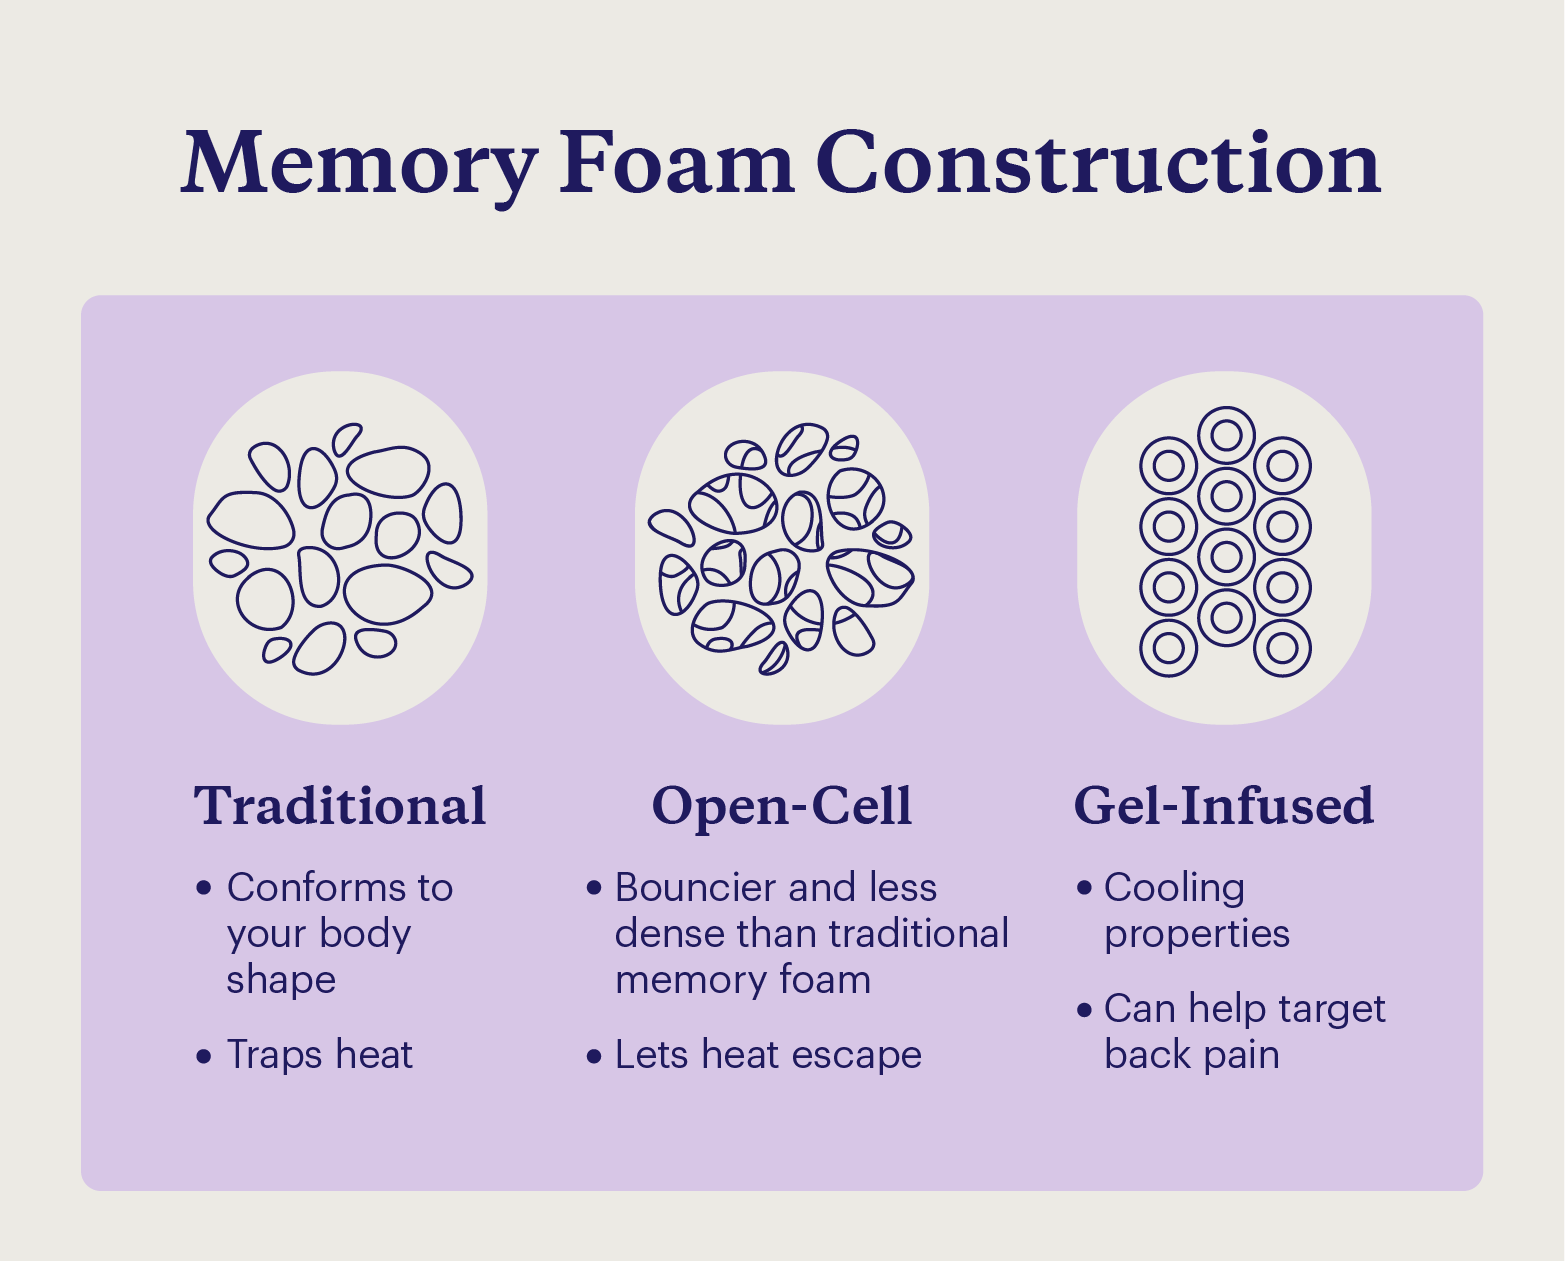 Graphic illustrating the differences between types of memory foam.